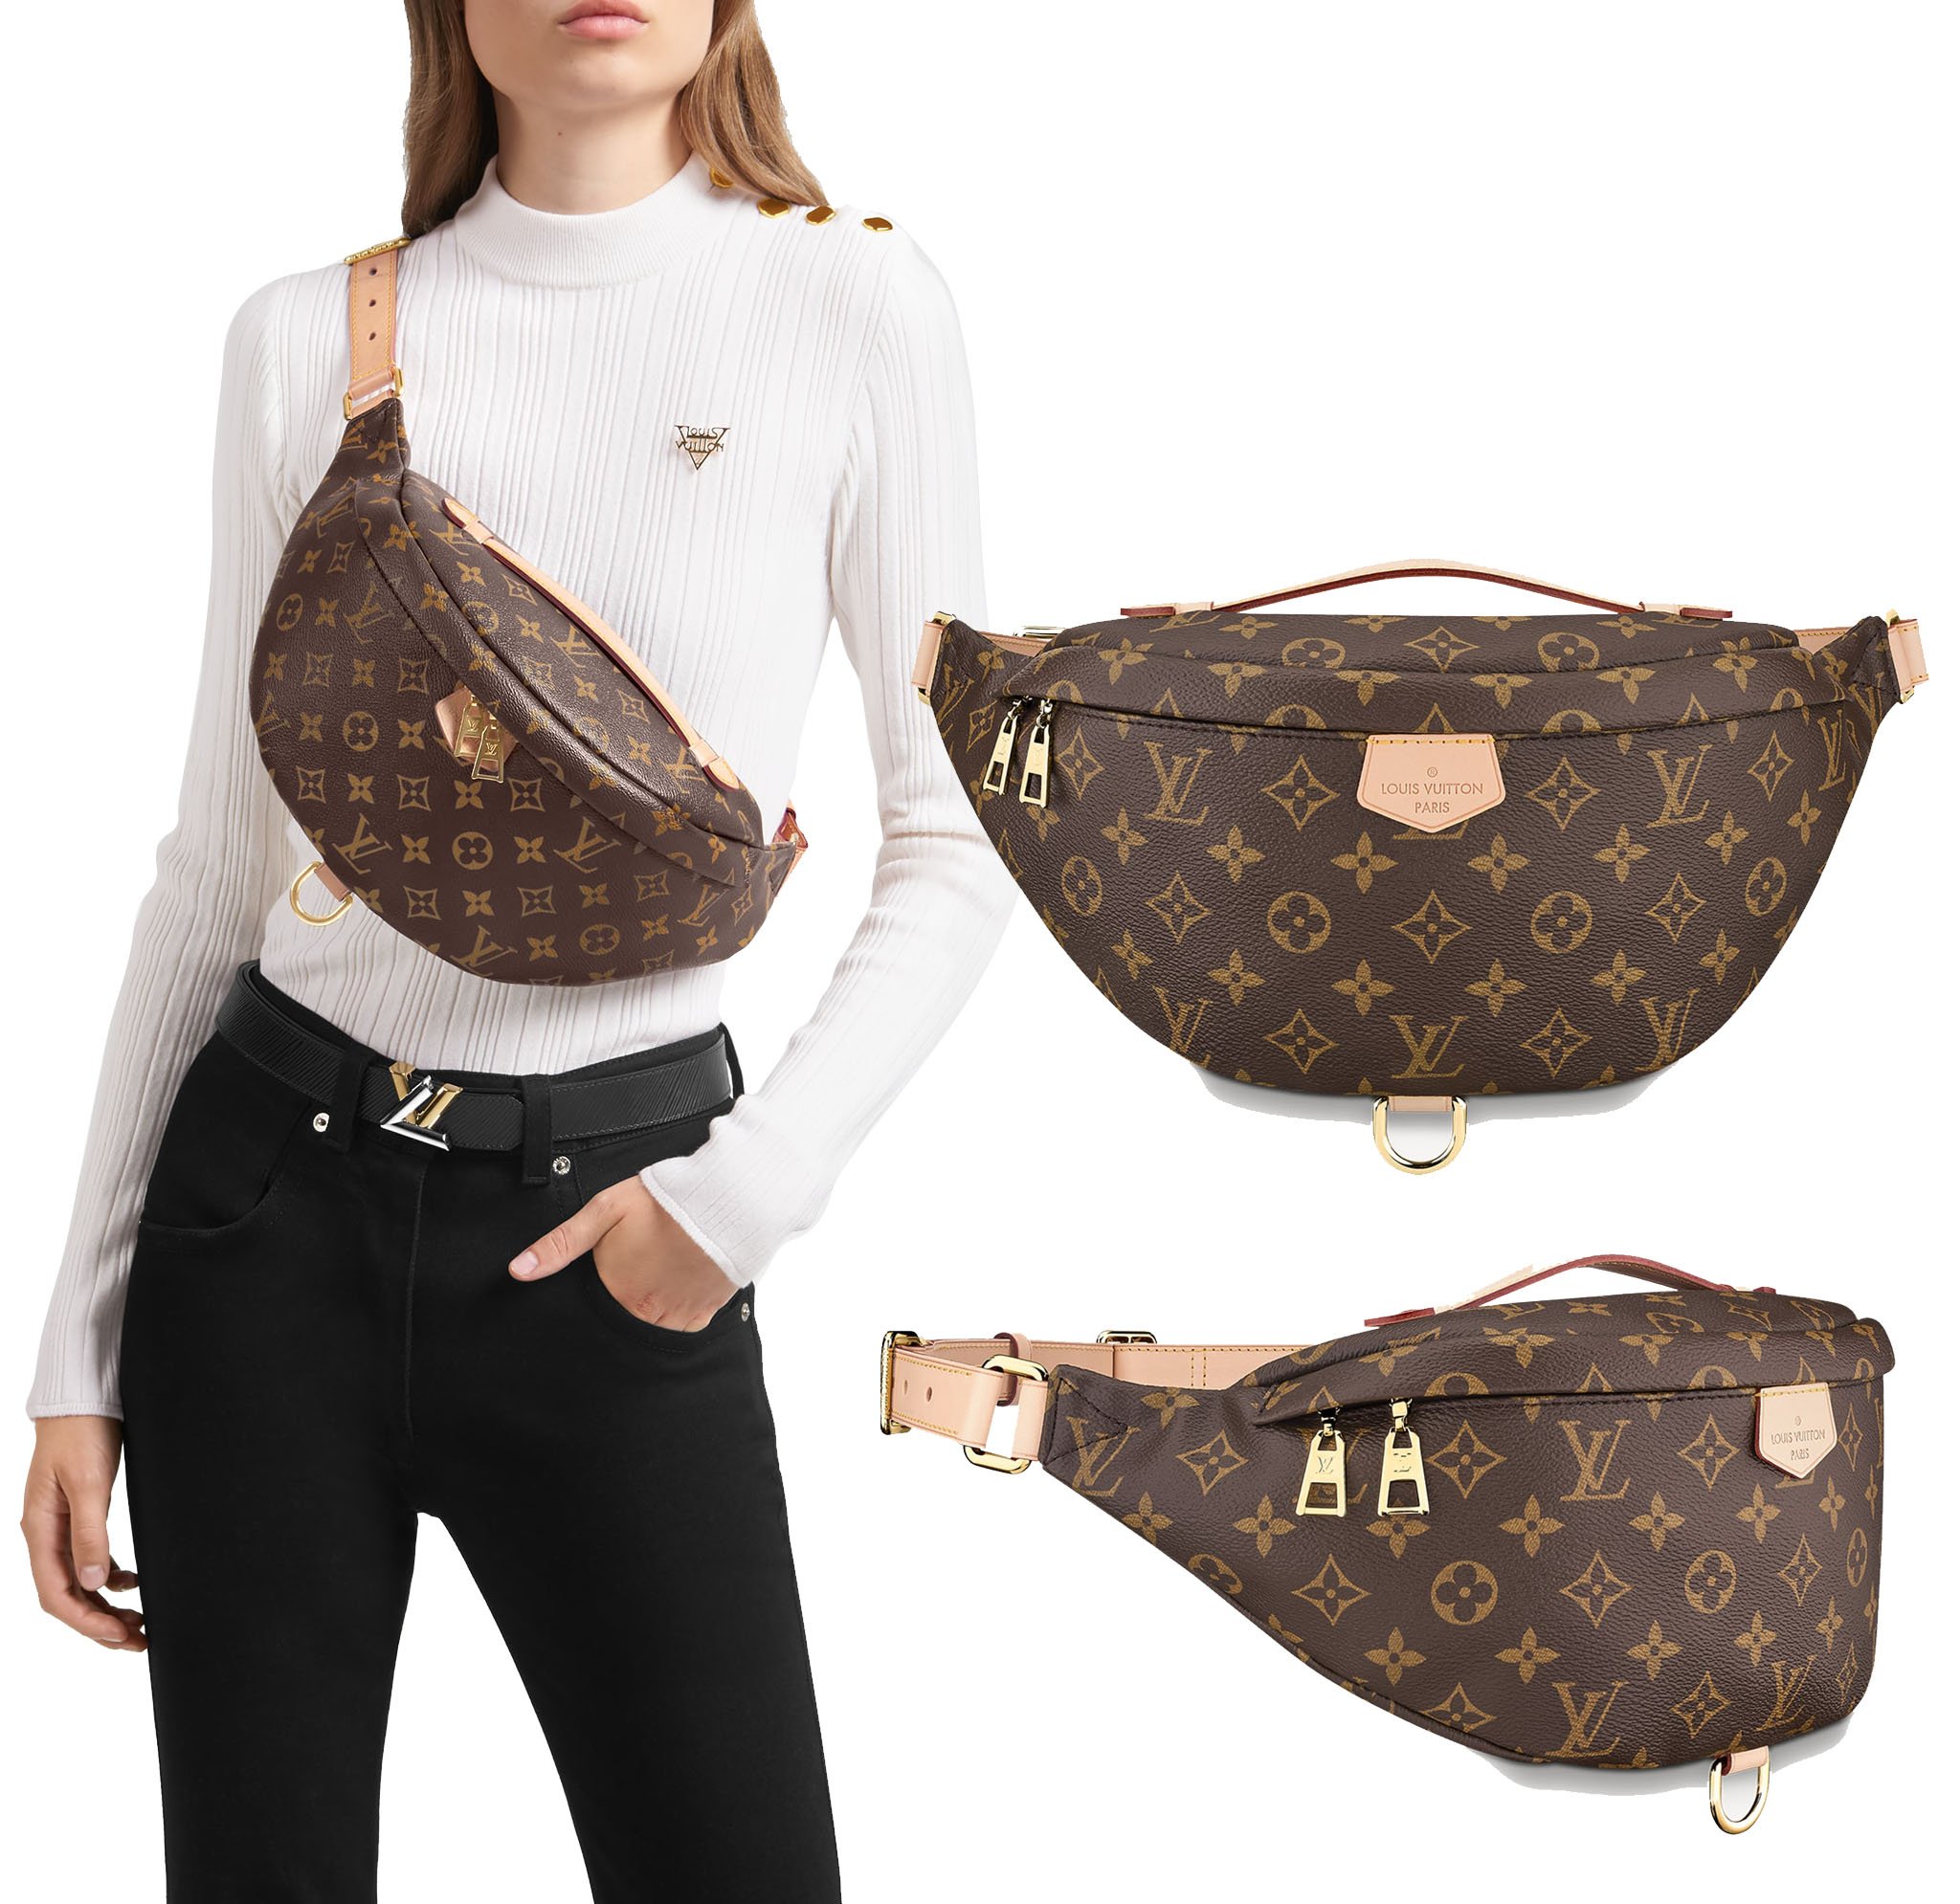 A fanny pack that you can wear as a sling bag across your body, Louis Vuitton's bumbag blends sportswear with Parisian chic with its silhouette and luxurious Monogram canvas